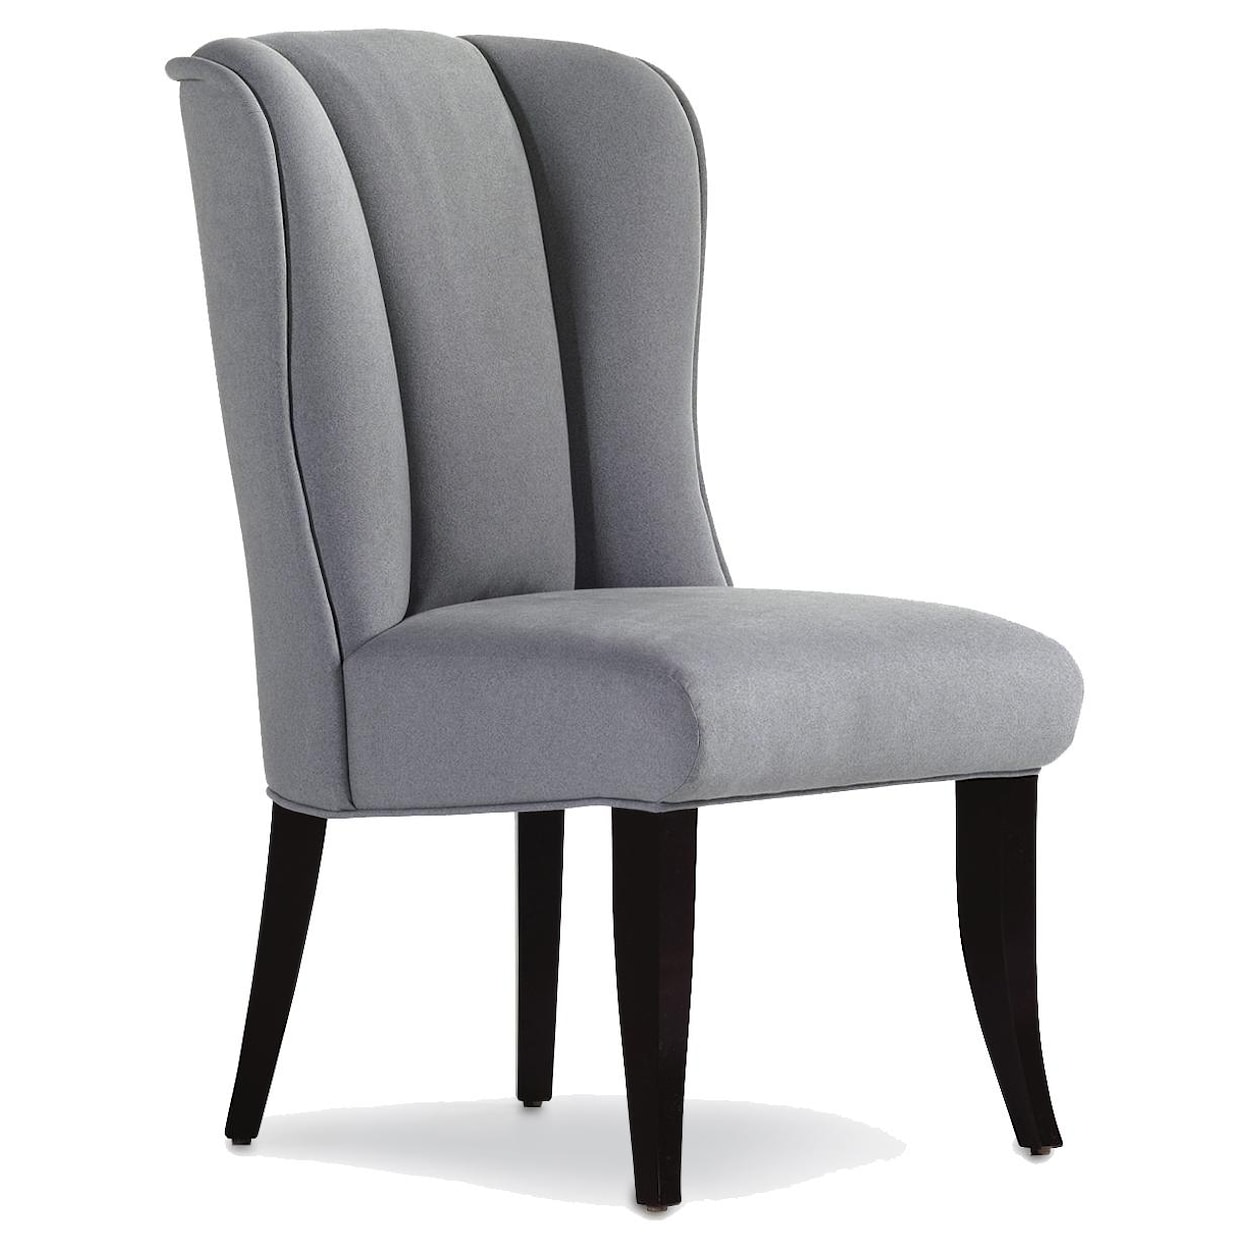 Jessica Charles Fine Upholstered Accents Keitt Dining Chair   